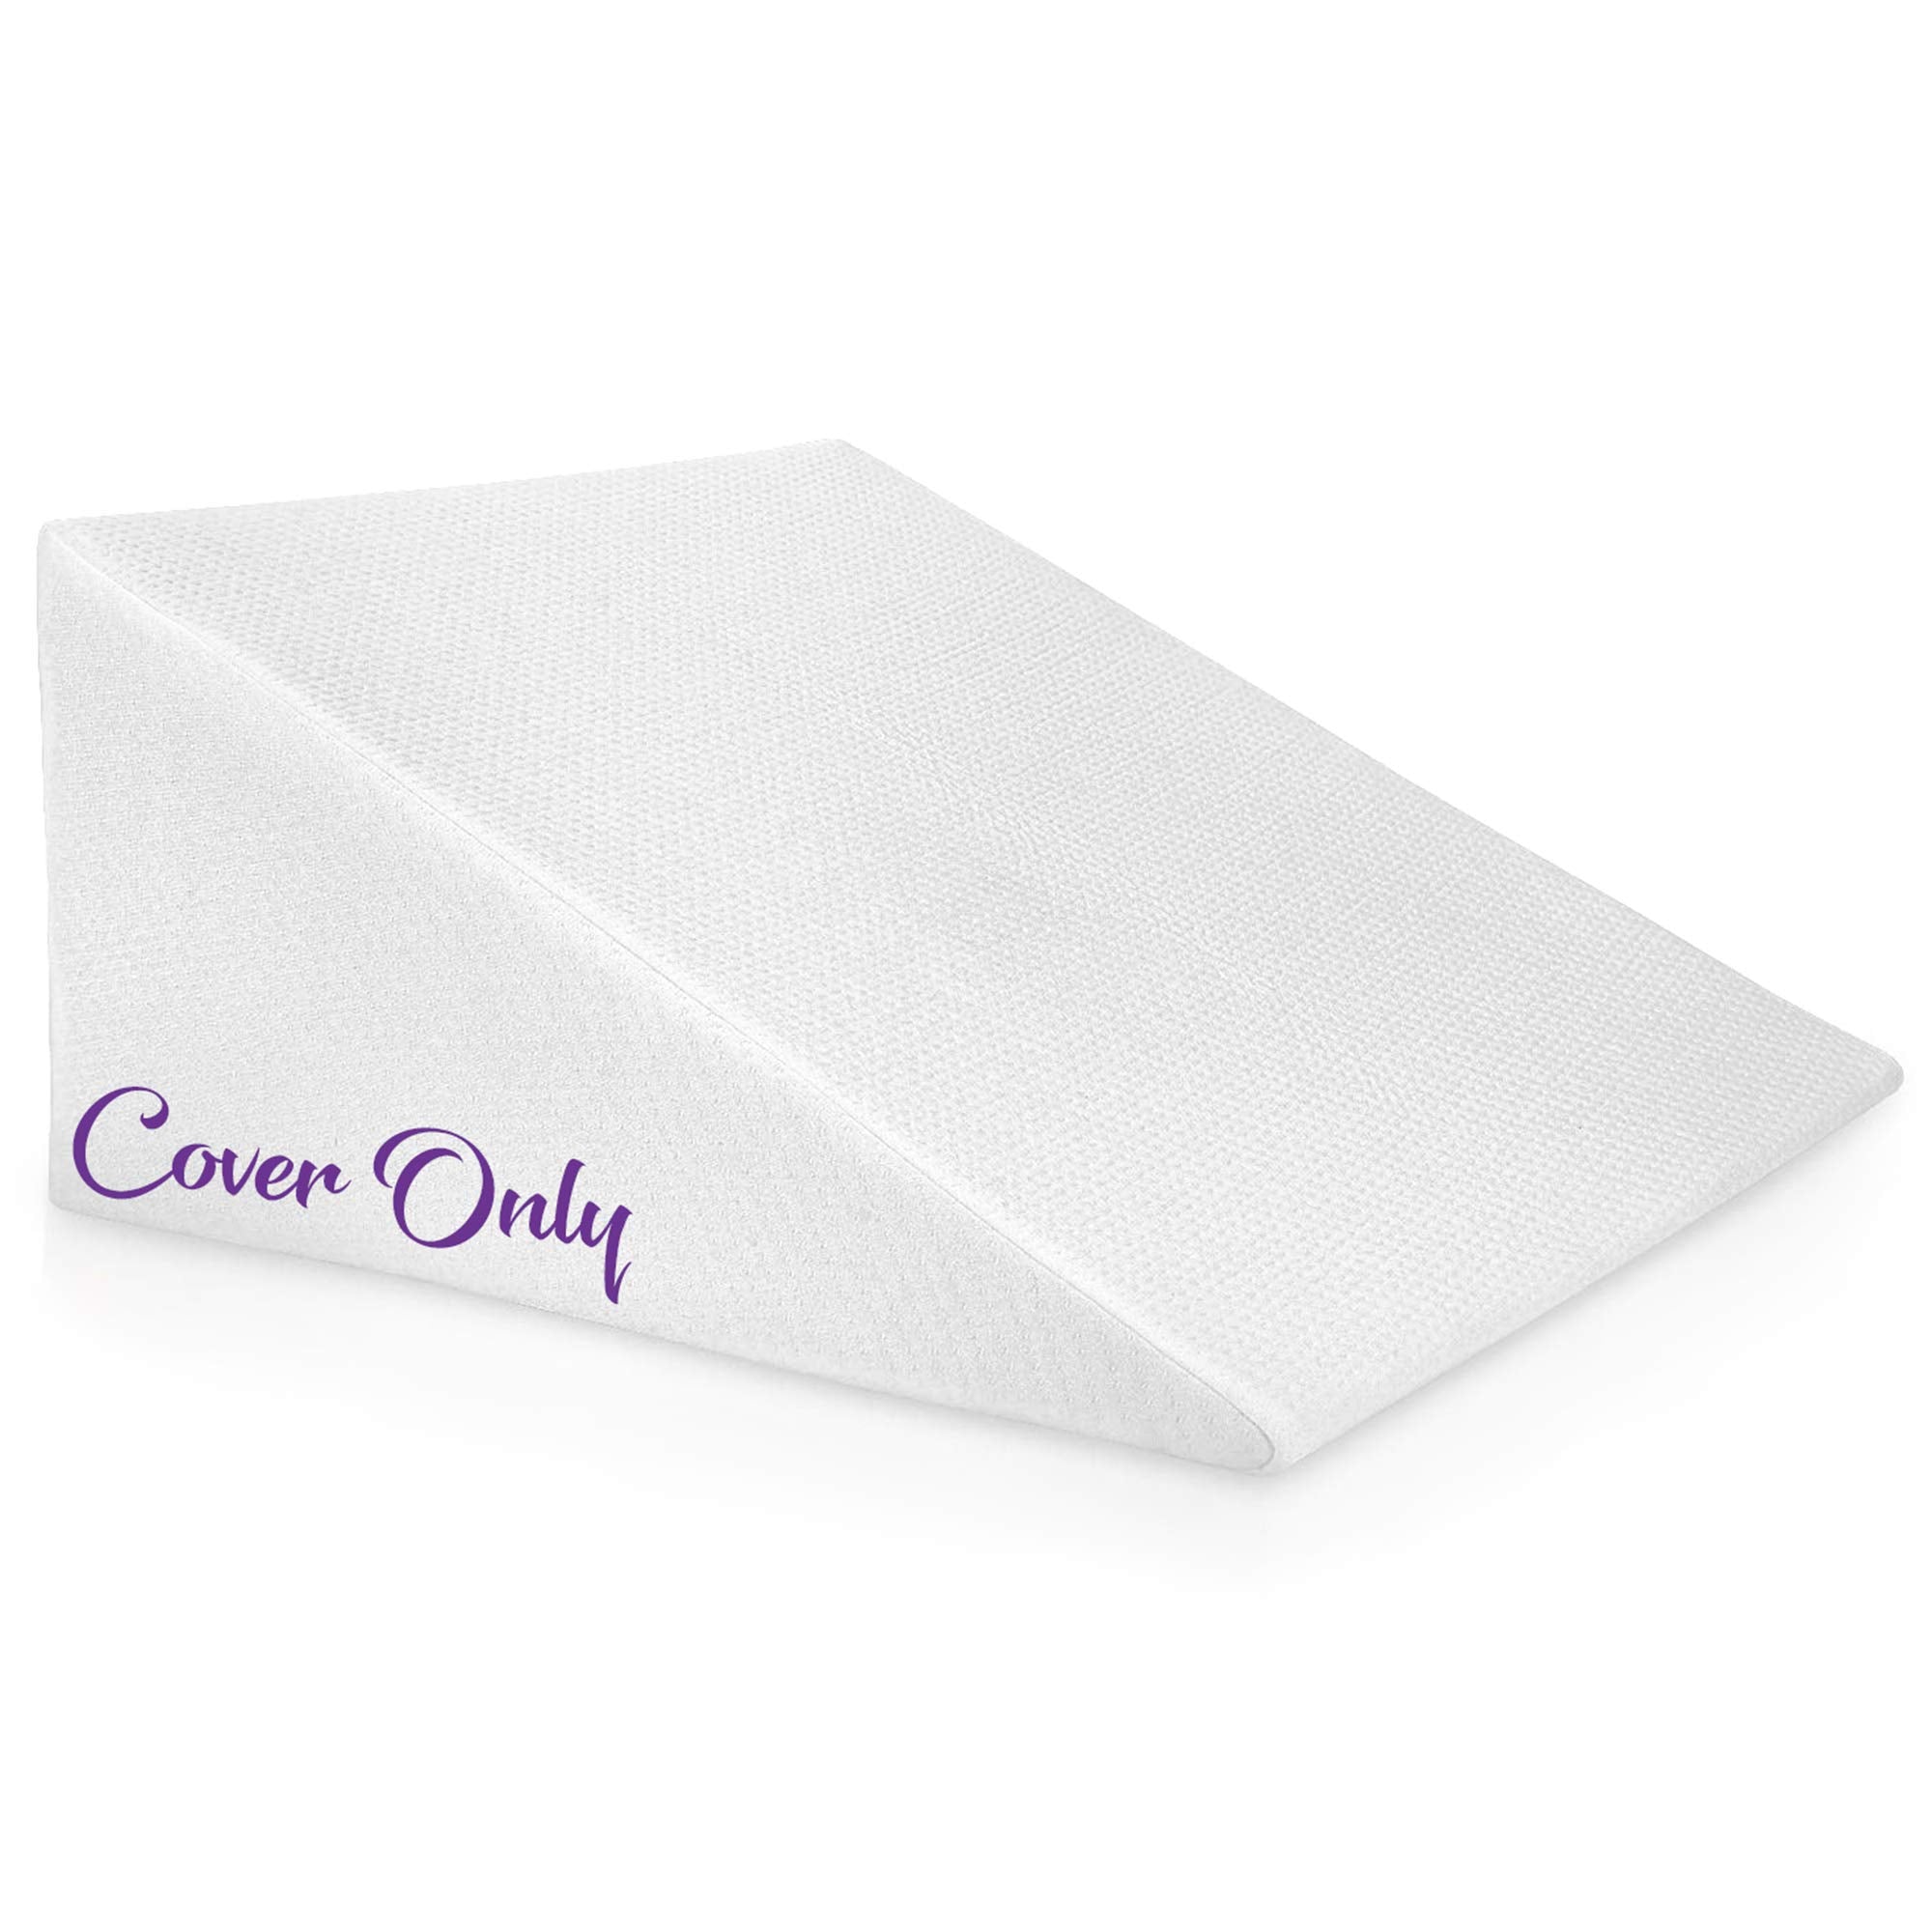 Ebung Bed Wedge Pillow Cover - Fits 12 Inch Bed Wedge Pillow - Replacement Cover Only - Washable  - Acceptable